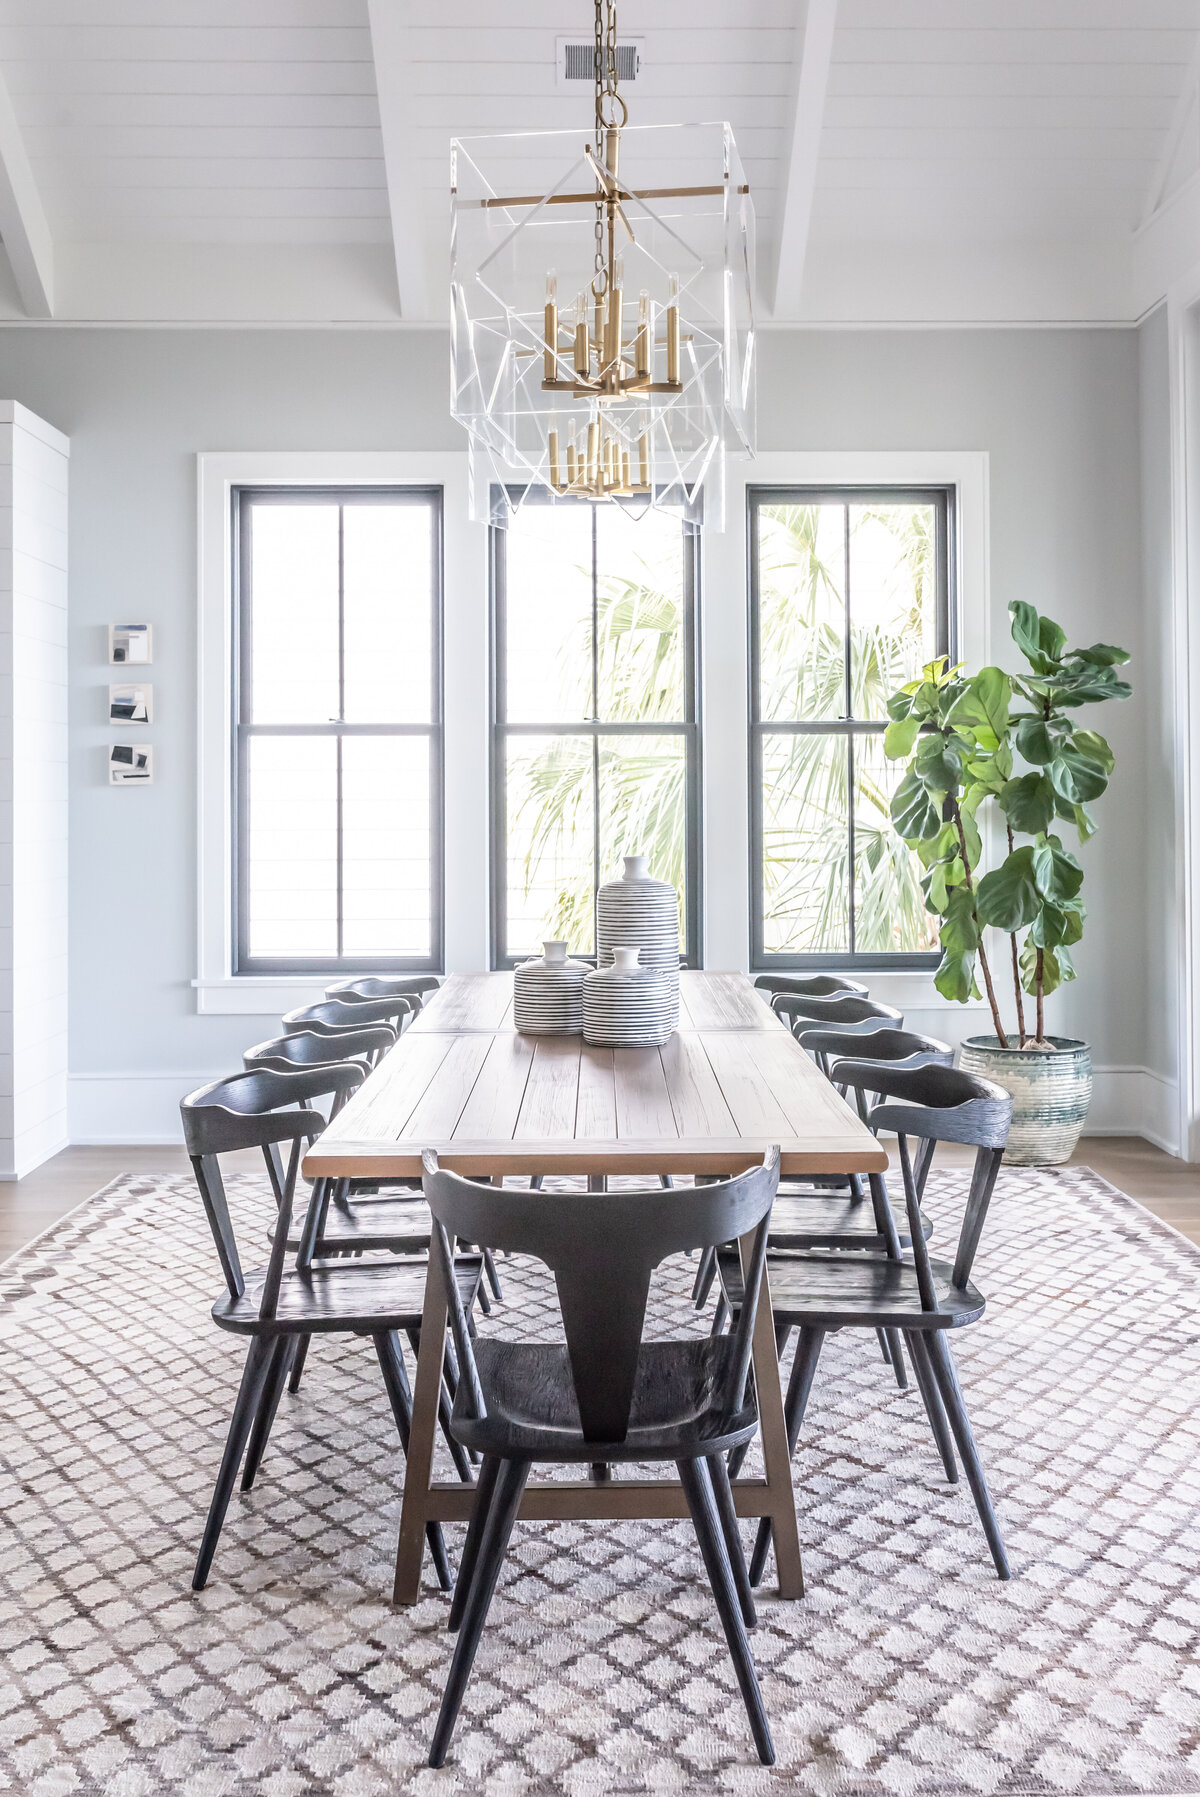 ADC-May1-2019-Dining-Room-2